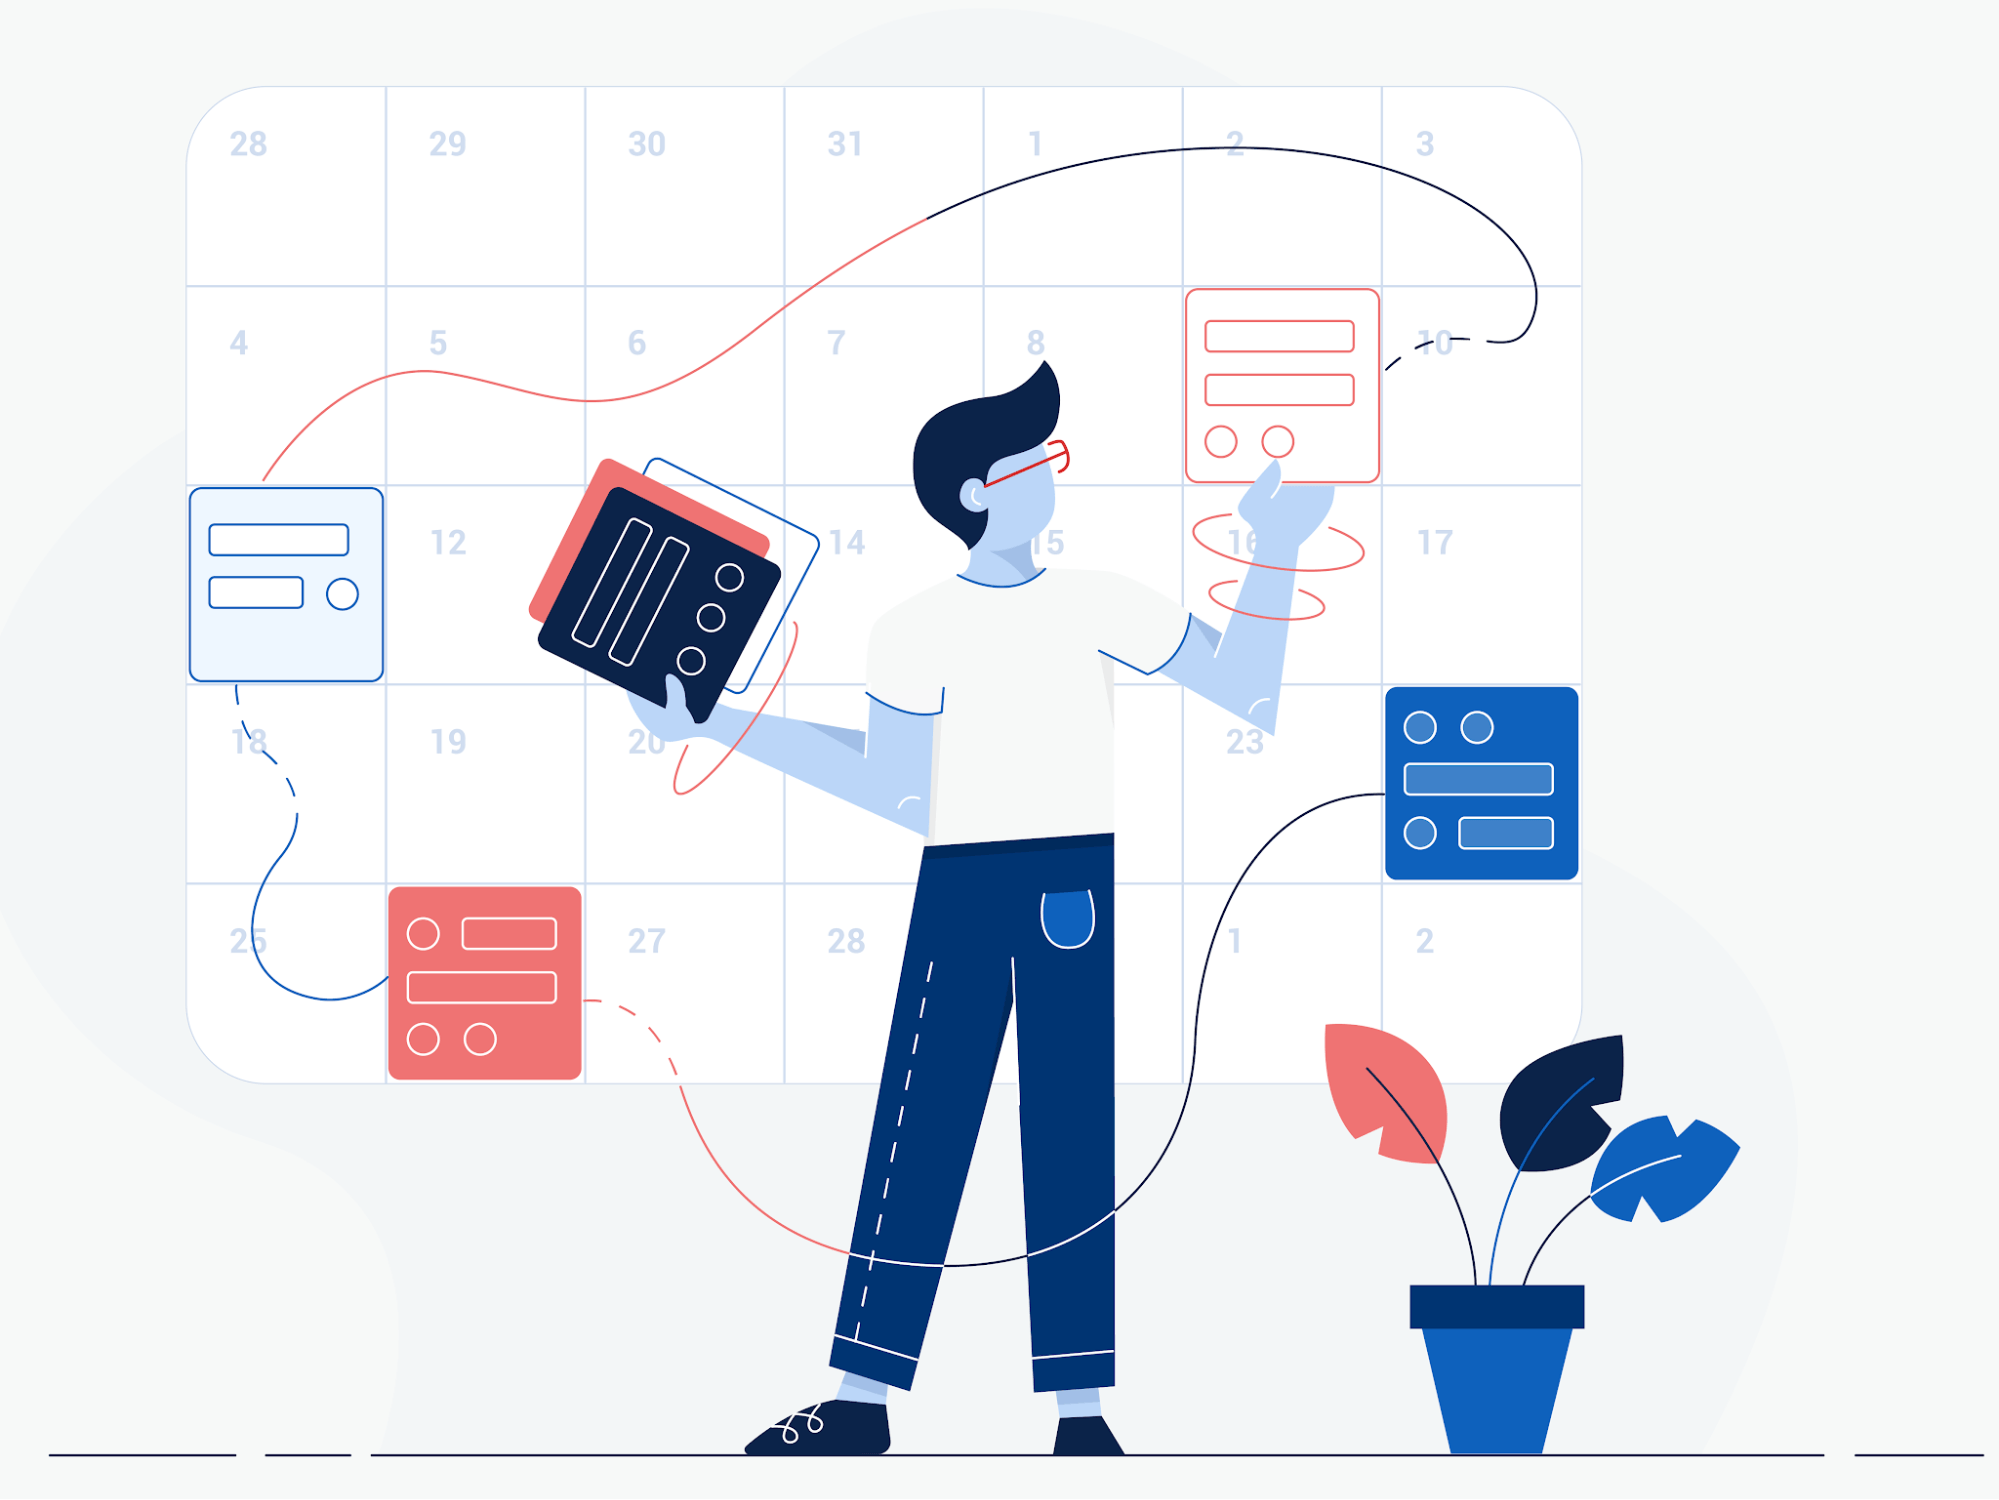 Task Manager for Asynchronous iOS Development - illustration by Sara Geci